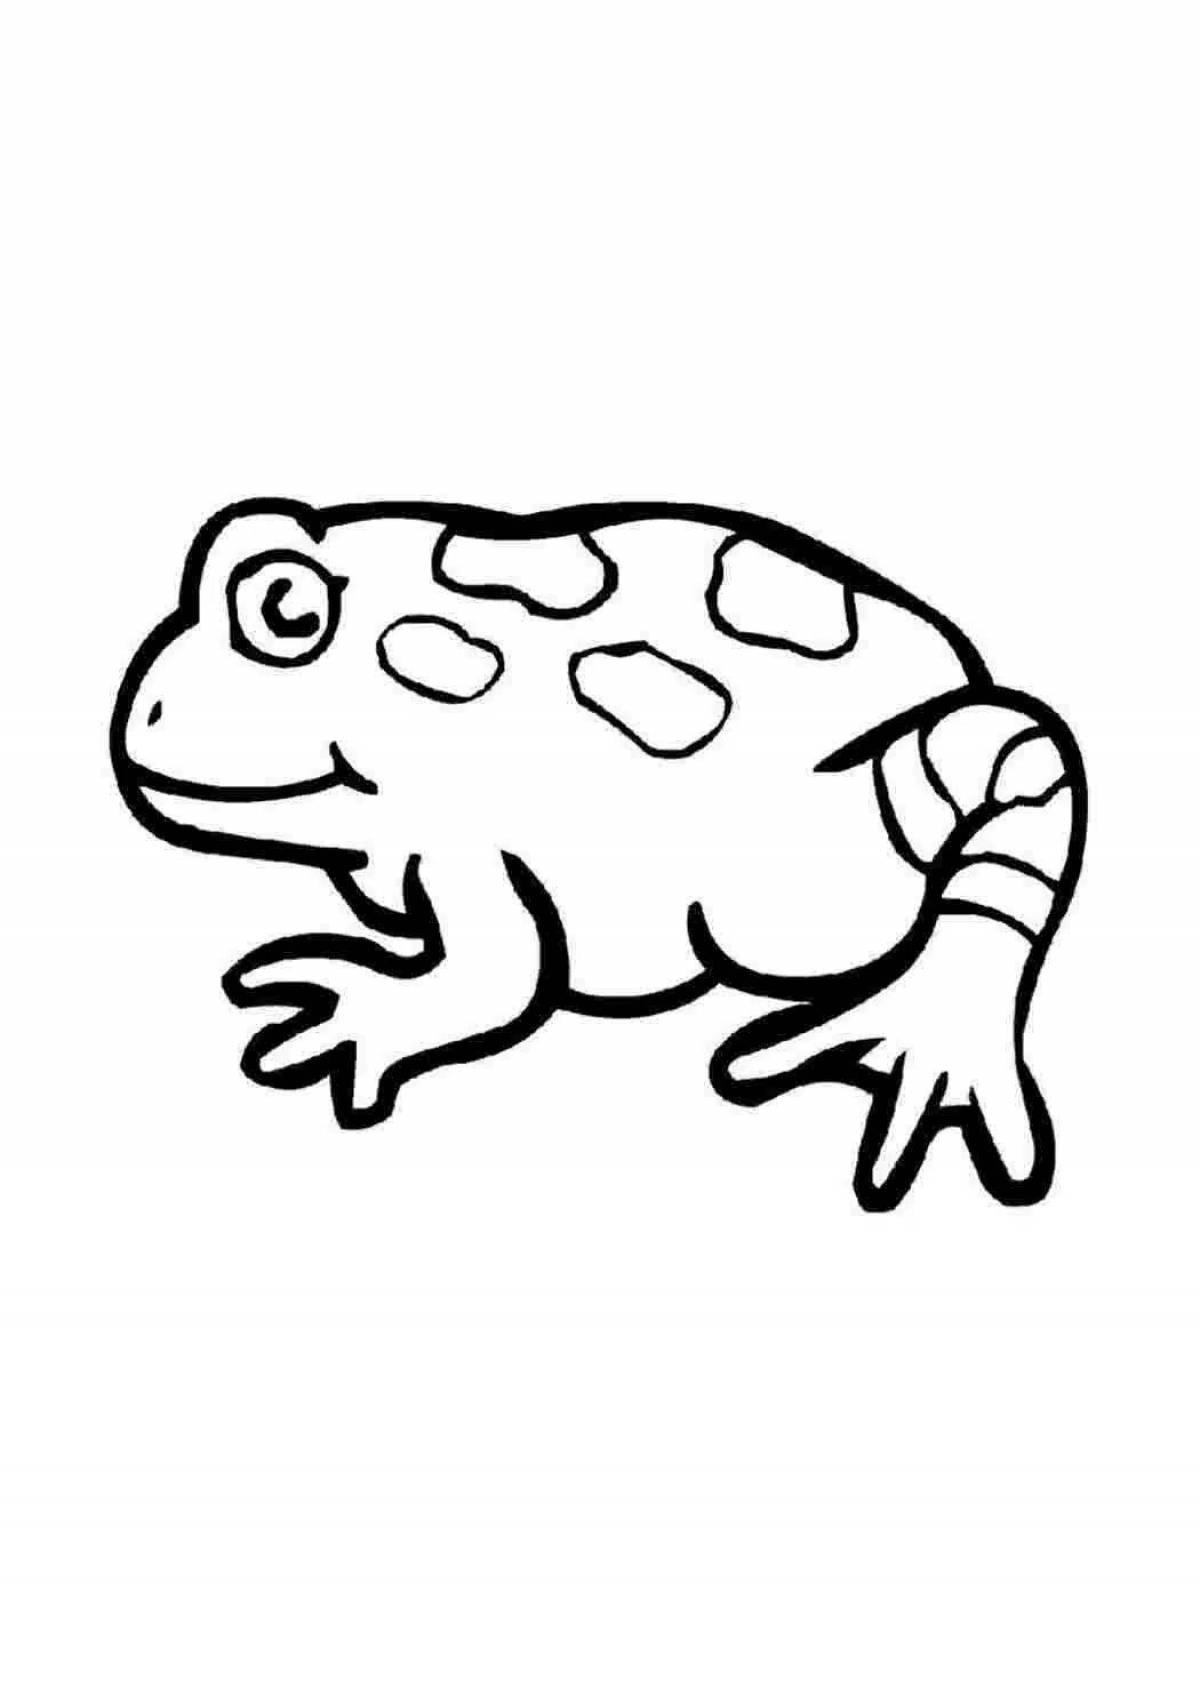 Frog drawing for kids #2